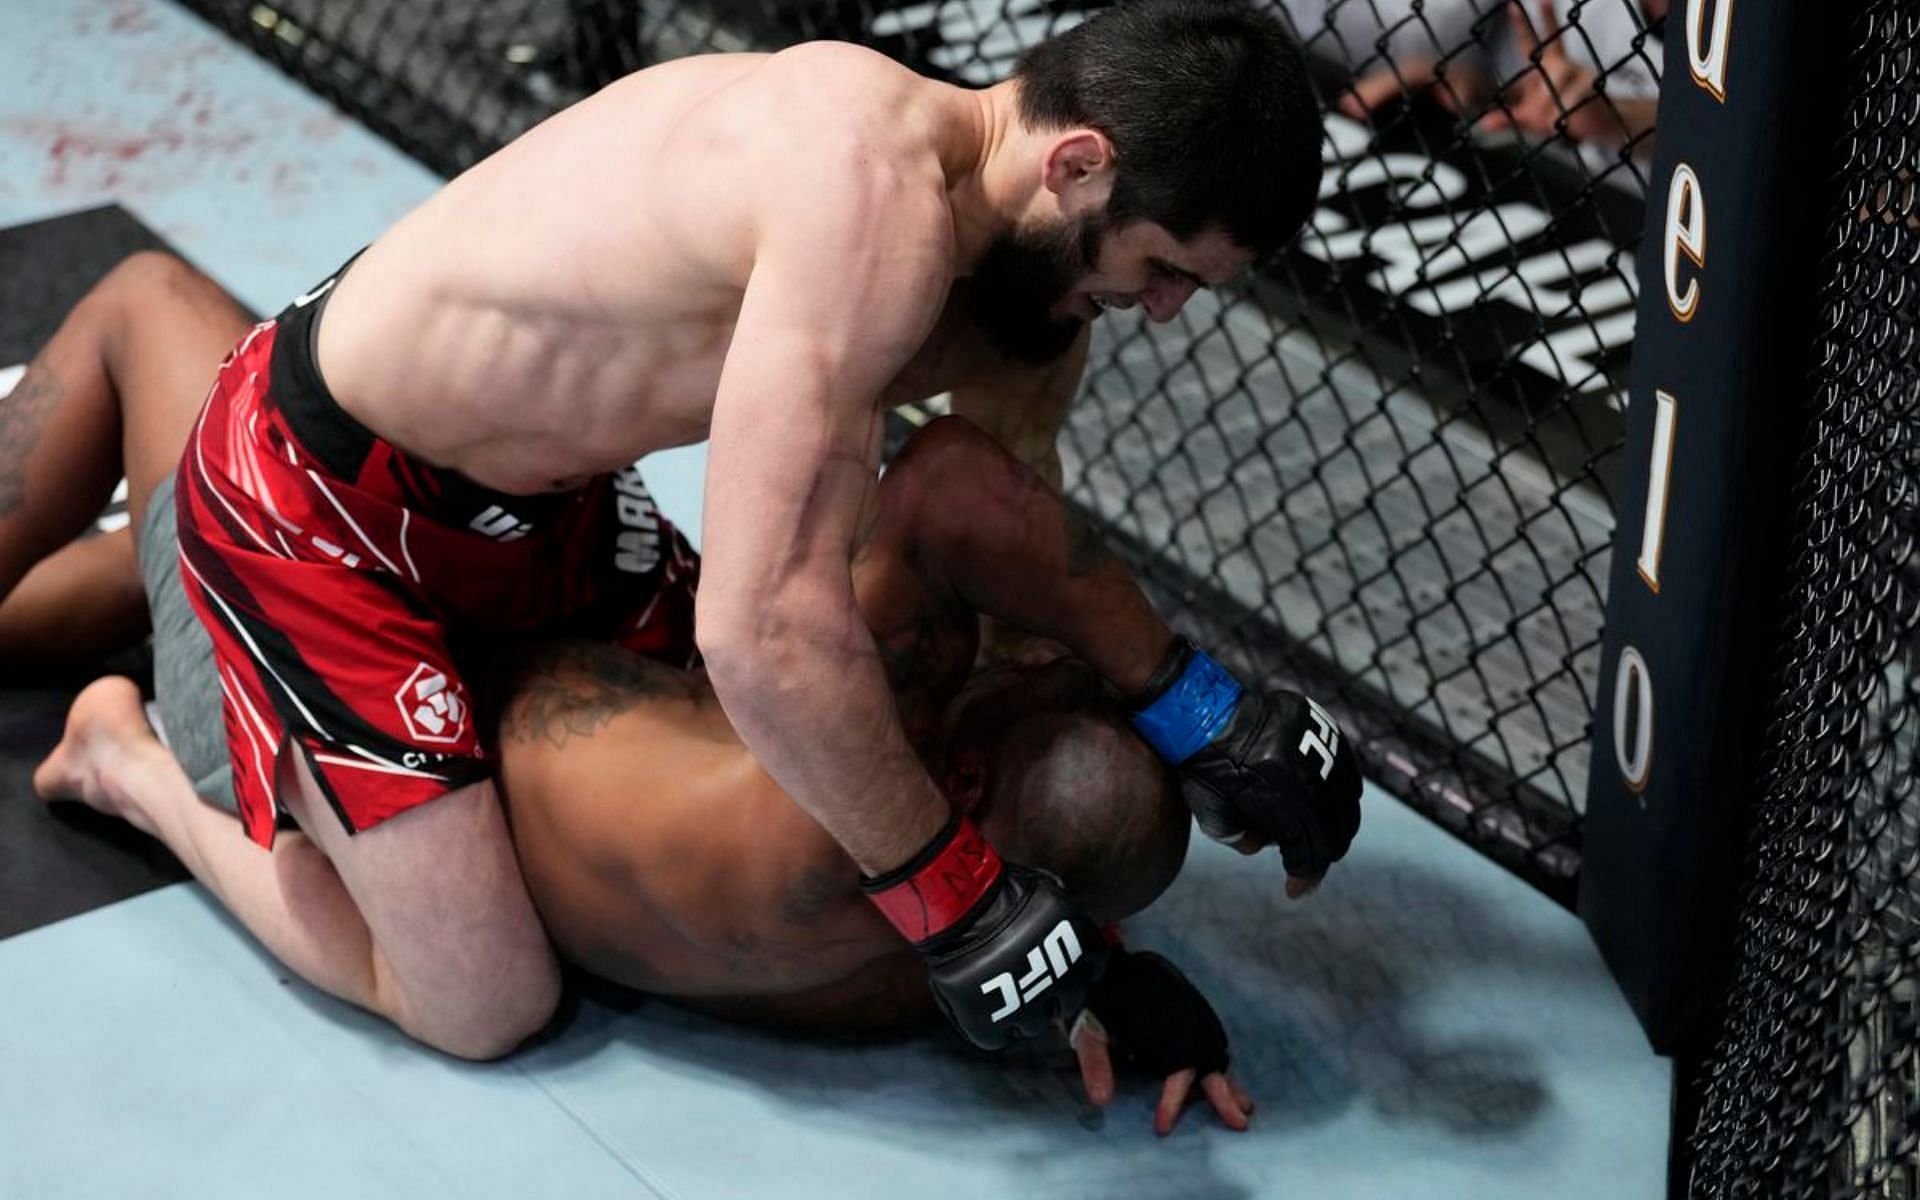 Islam Makhachev is more than just a grappler, as Bobby Green recently found out